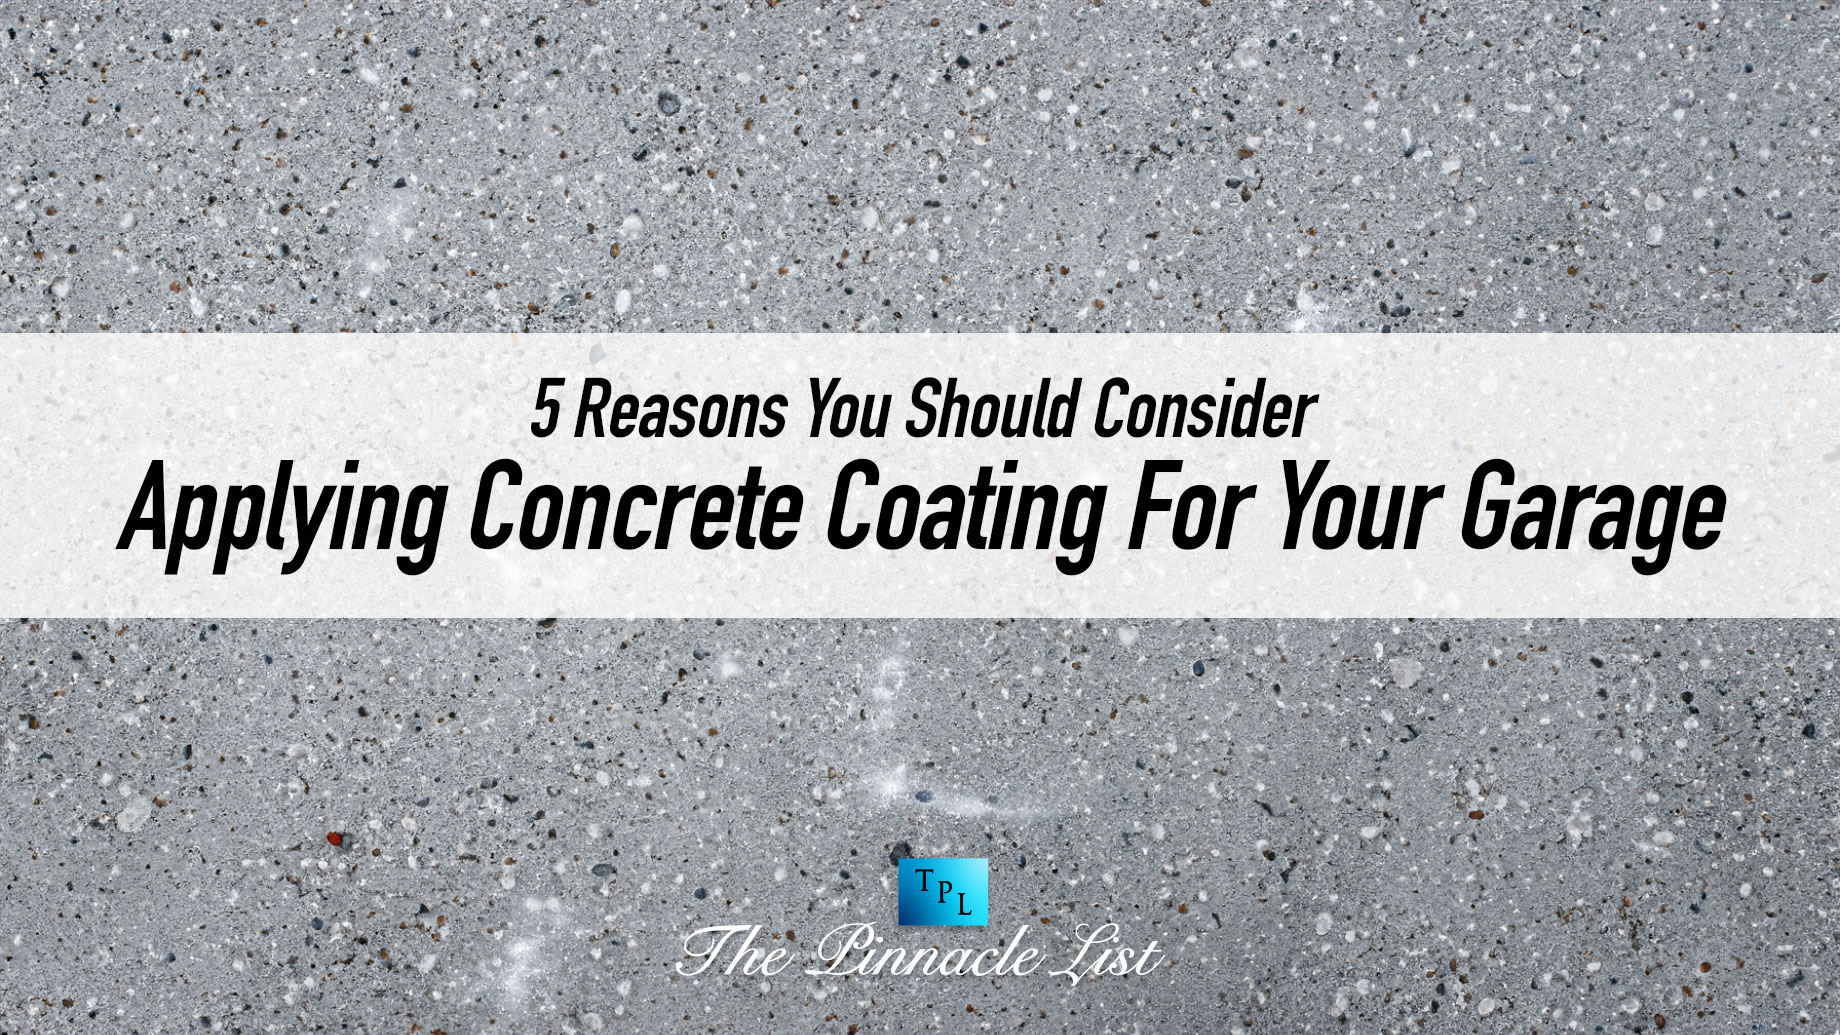 5 Reasons You Should Consider Applying Concrete Coating For Your Garage